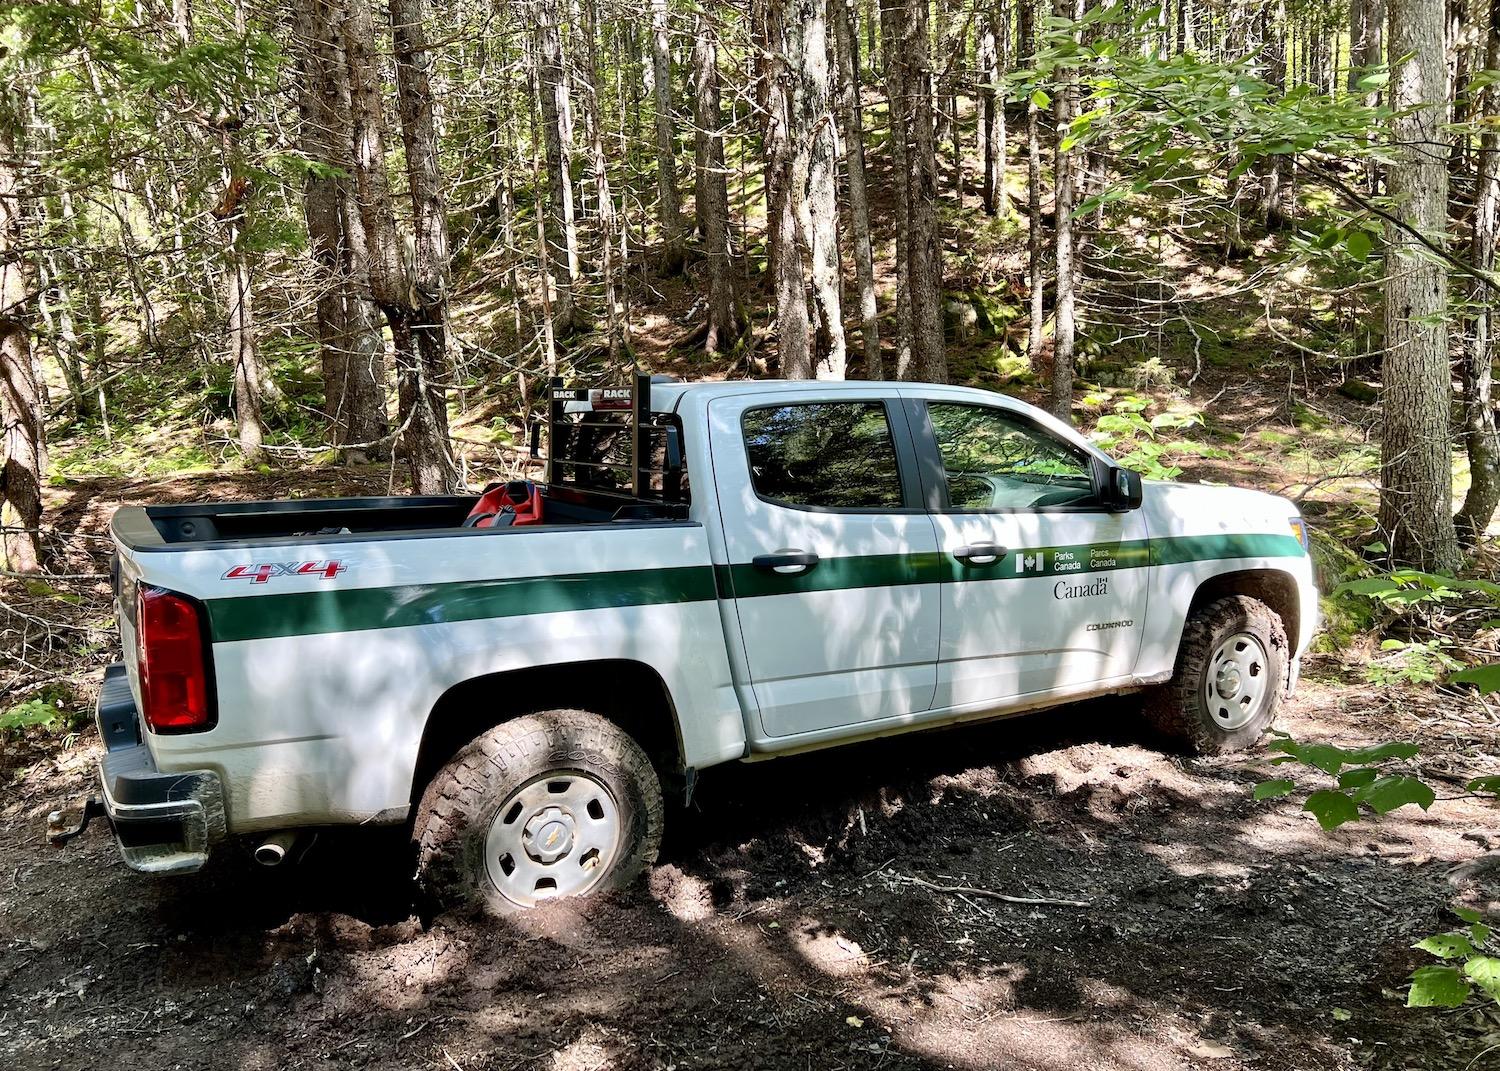 To get to the Upper Salmon River salmon pool, we had to take this Parks Canada truck down some bumpy back roads that the public can't access.